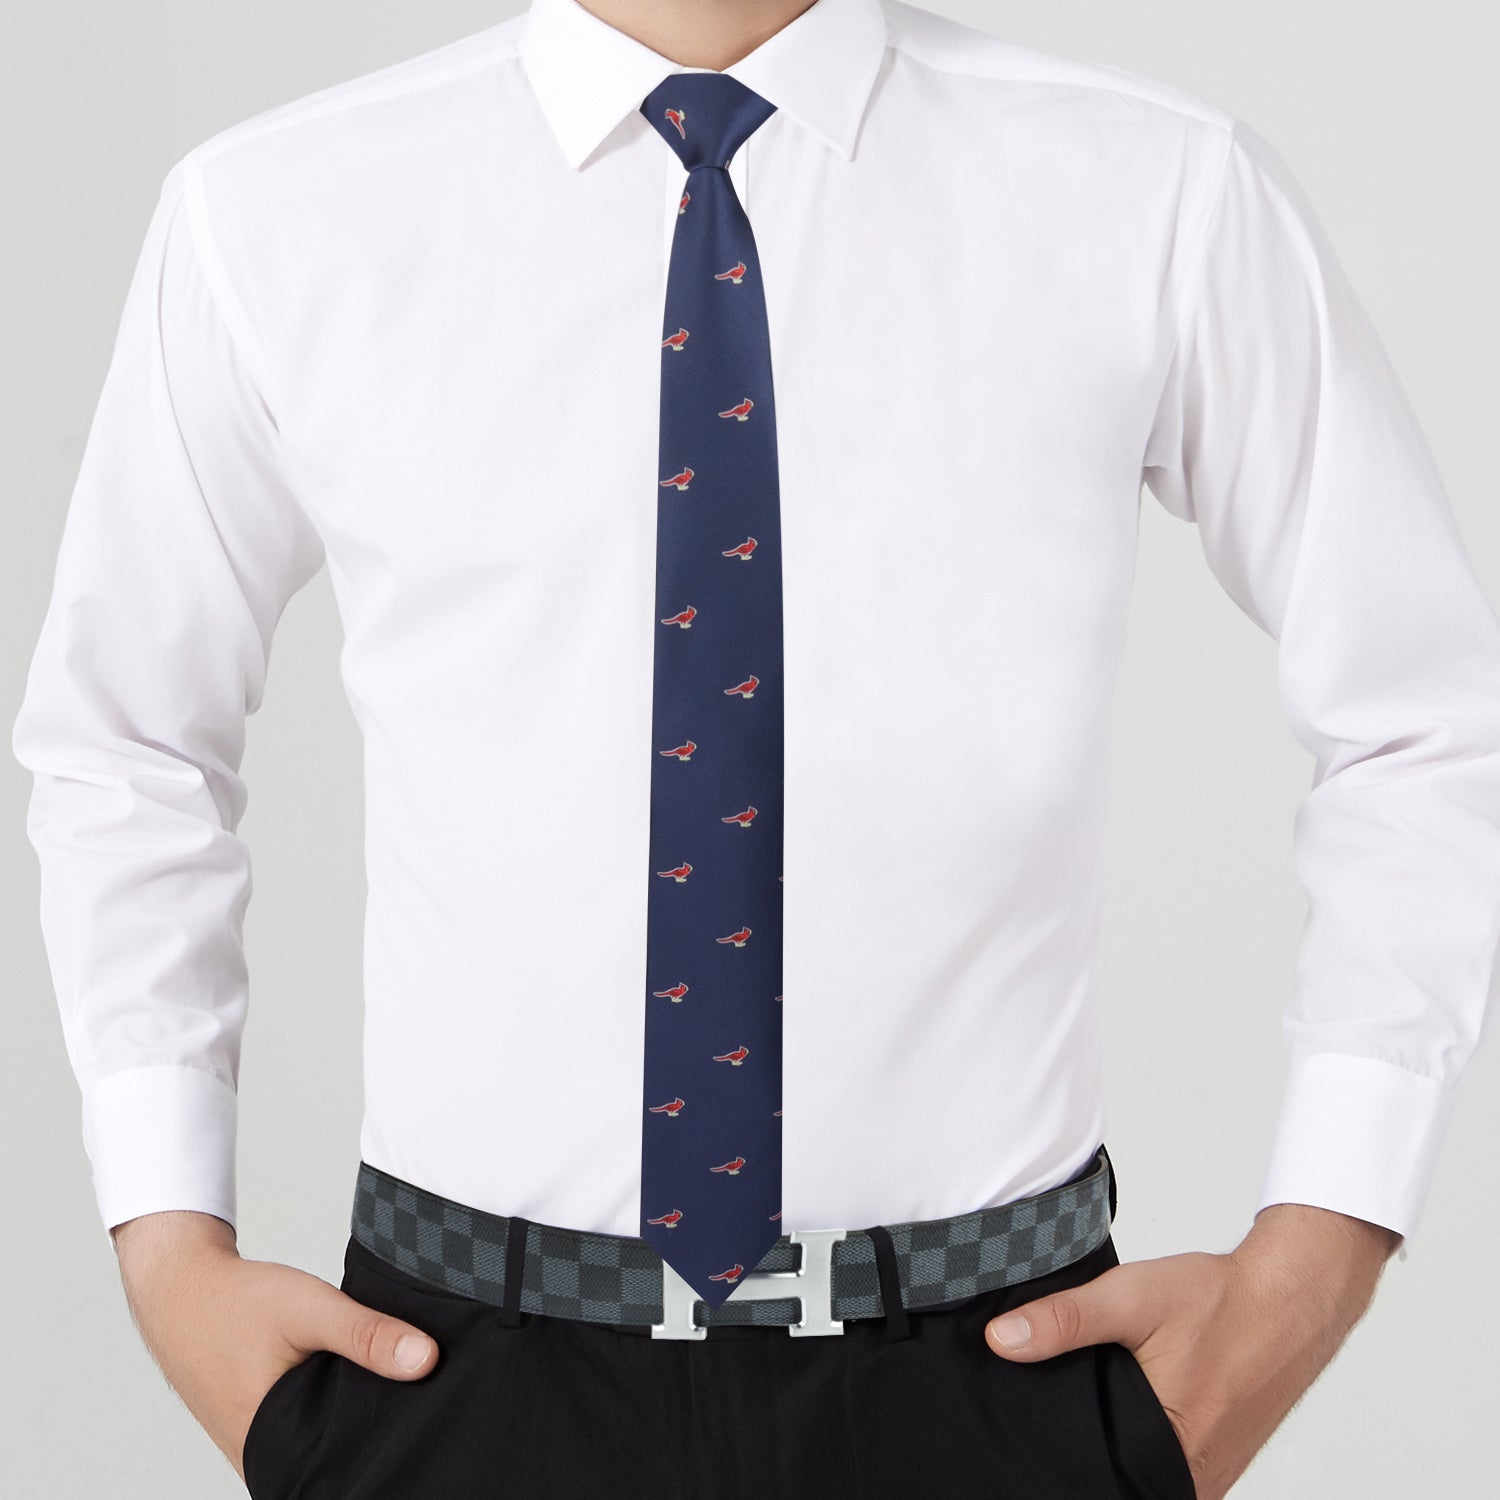 A man wearing a Cardinal Bird Skinny Tie and white shirt with a touch of vivid elegance.